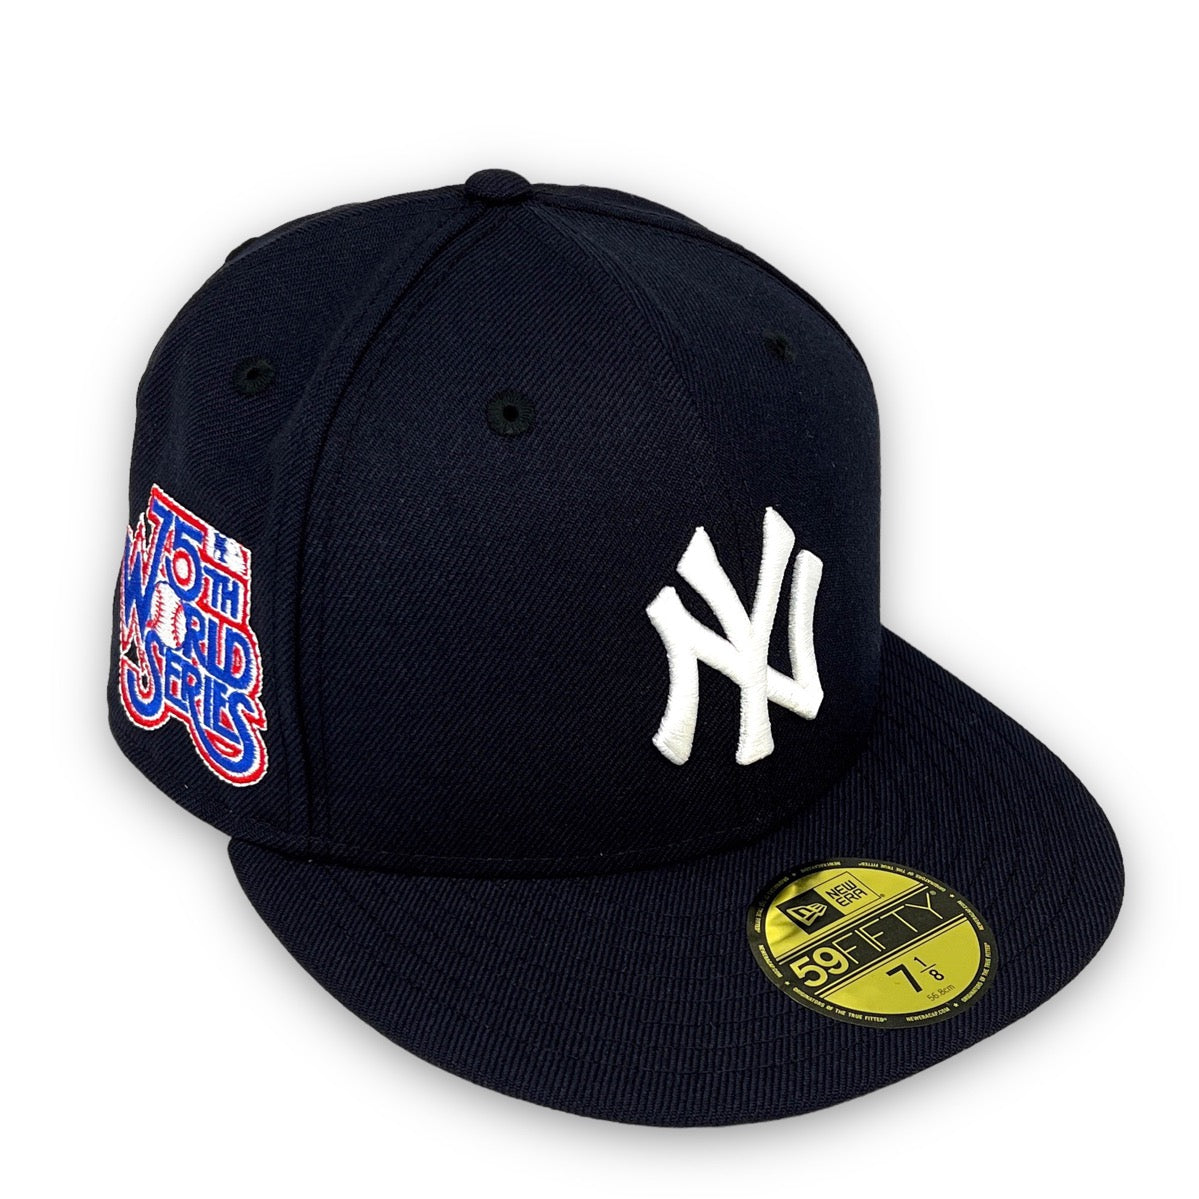 Bottom New 75 Era CAP Grey Fitted WS KING 59FIFTY – USA Navy Yankees Hat